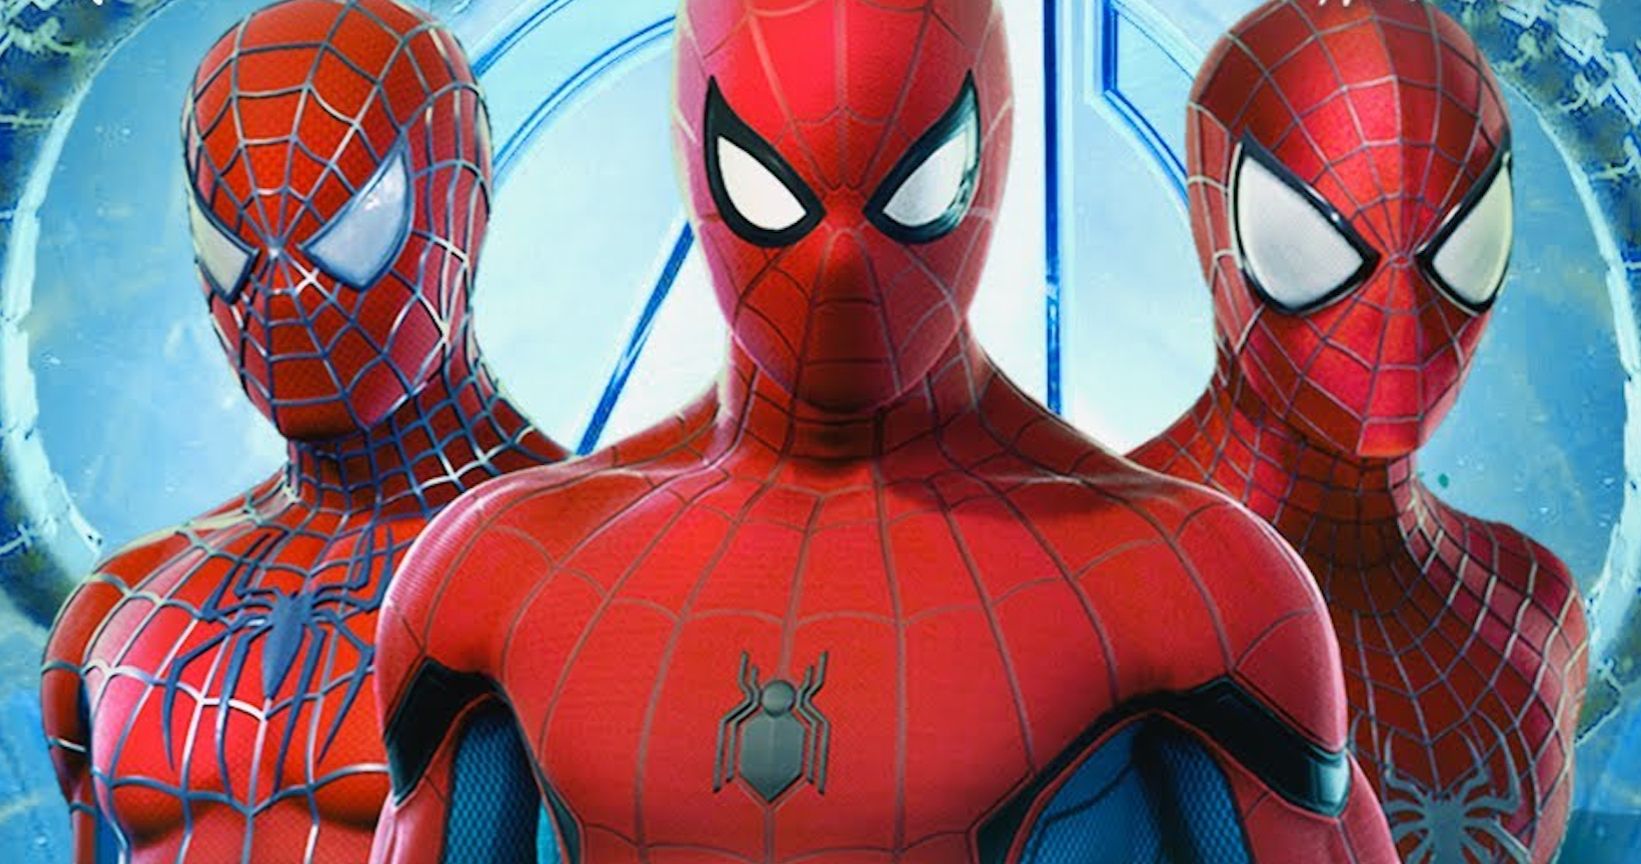 Spider-Man: No Way Home Won't Stop Trolling Fans Eagerly Awaiting the Trailer